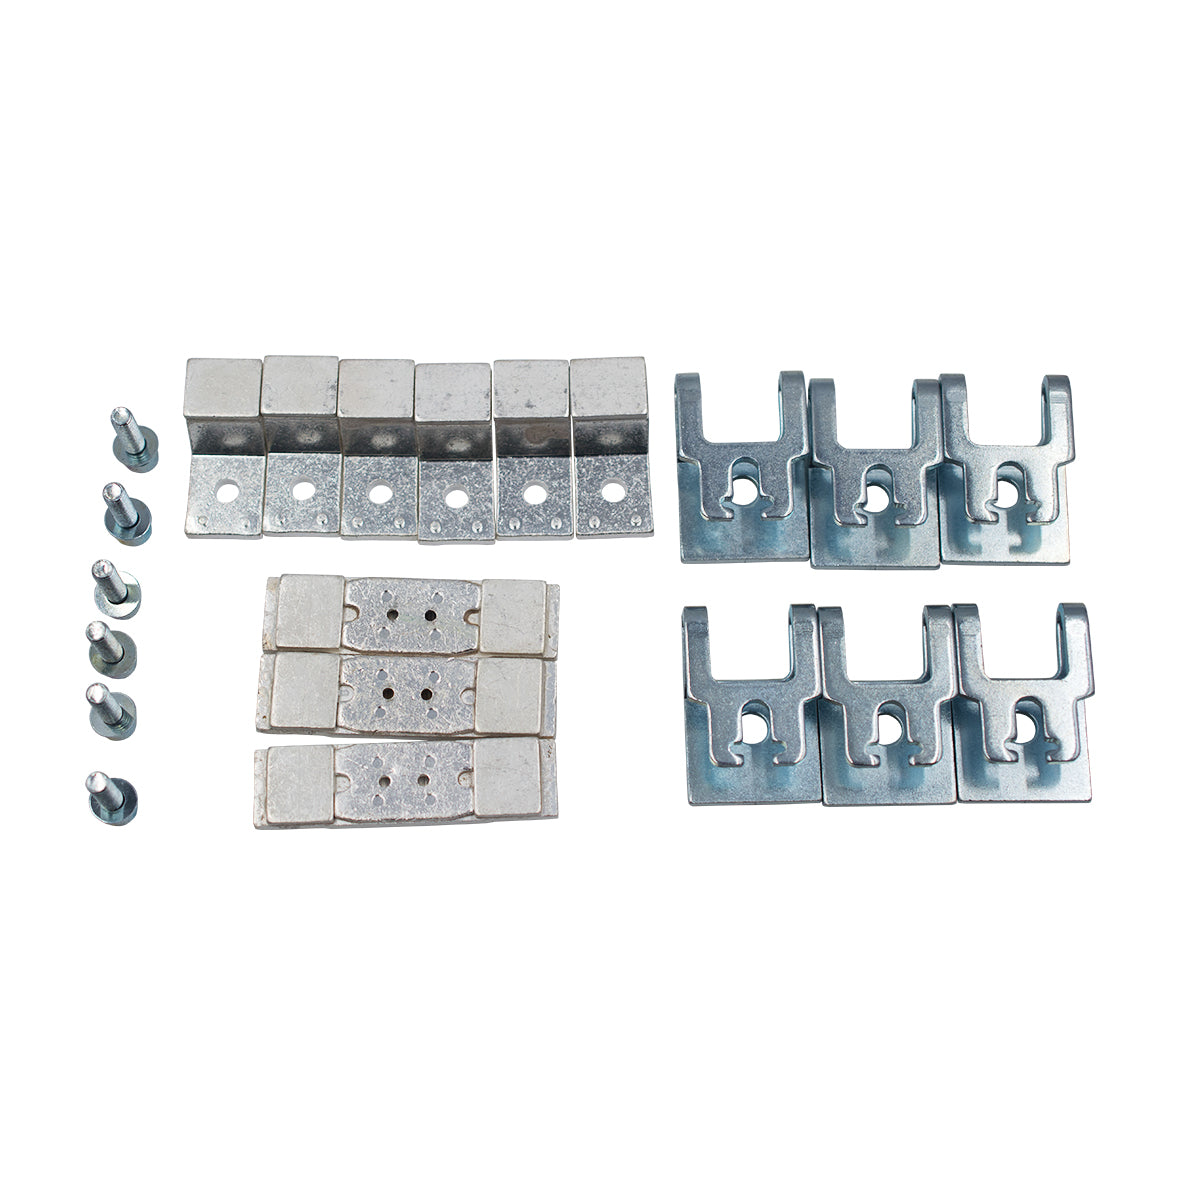 3TF Contact kits 3TY7540-0A for the Siemens 3TF54 contactor